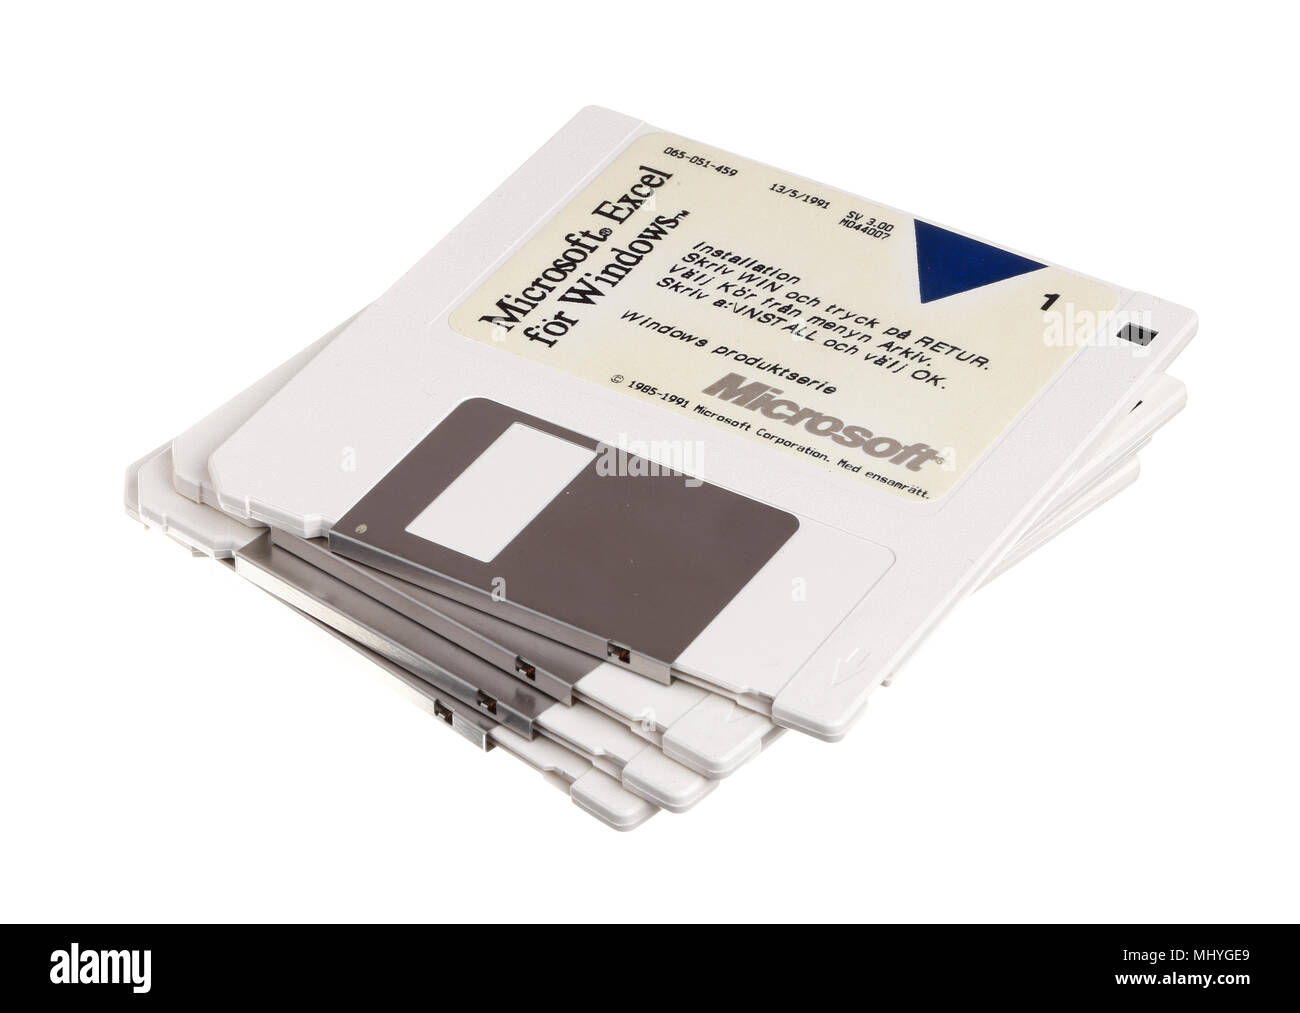 Stockholm, Sweden - September 3, 2014: Four istallations floppies for the Swedish version of Microsoft Excel 3.00 for Microsoft Windows. The discs are Stock Photo